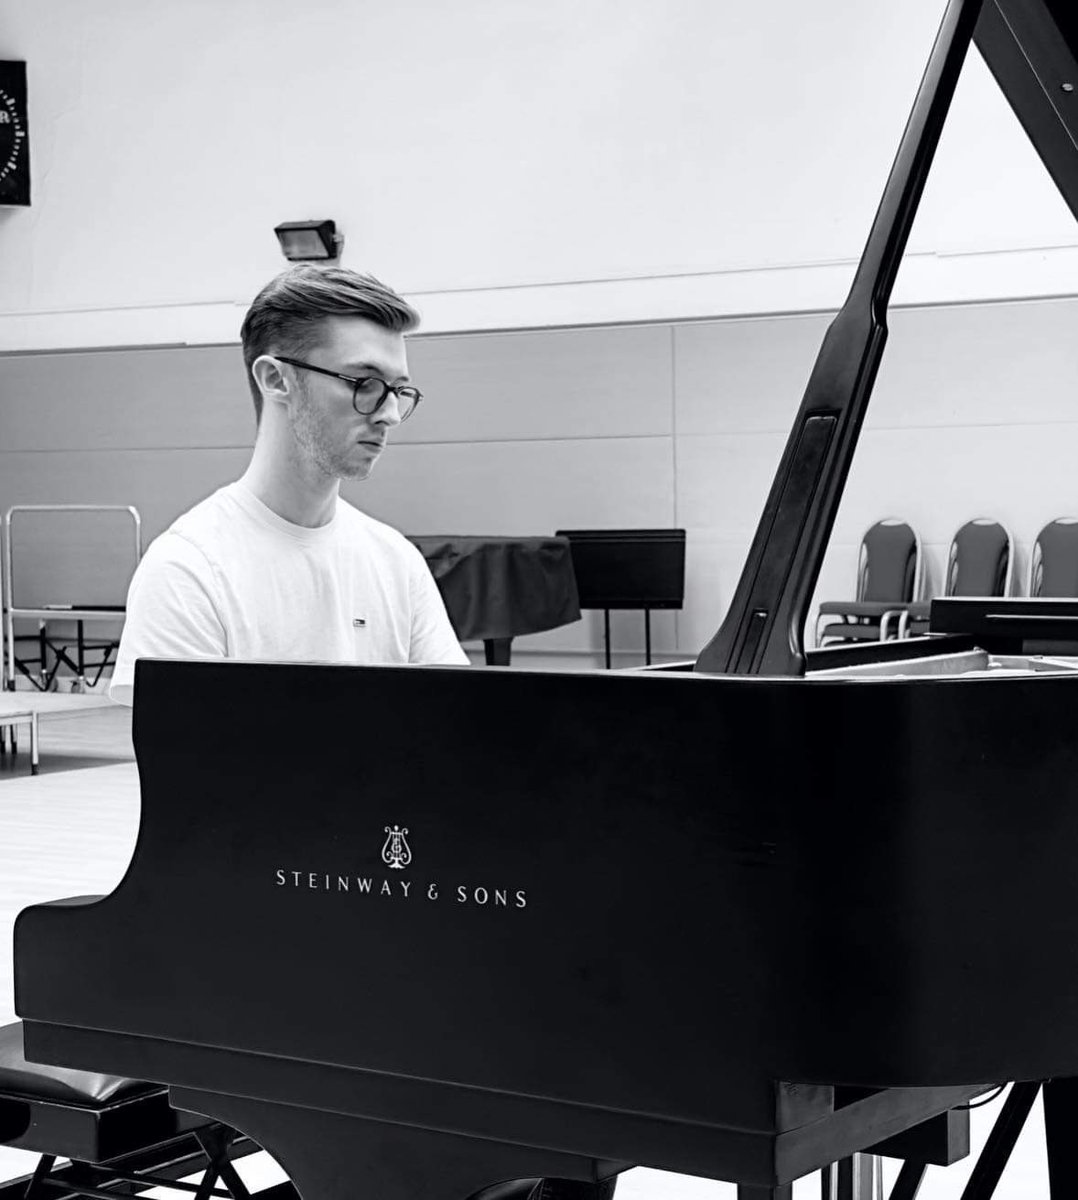 Huge congratulations to former pupil Andrew Smith who has been offered a place on the Master of Studies in Music (Performance) course at the University of Oxford. A very proud school and Music Dept!!!!